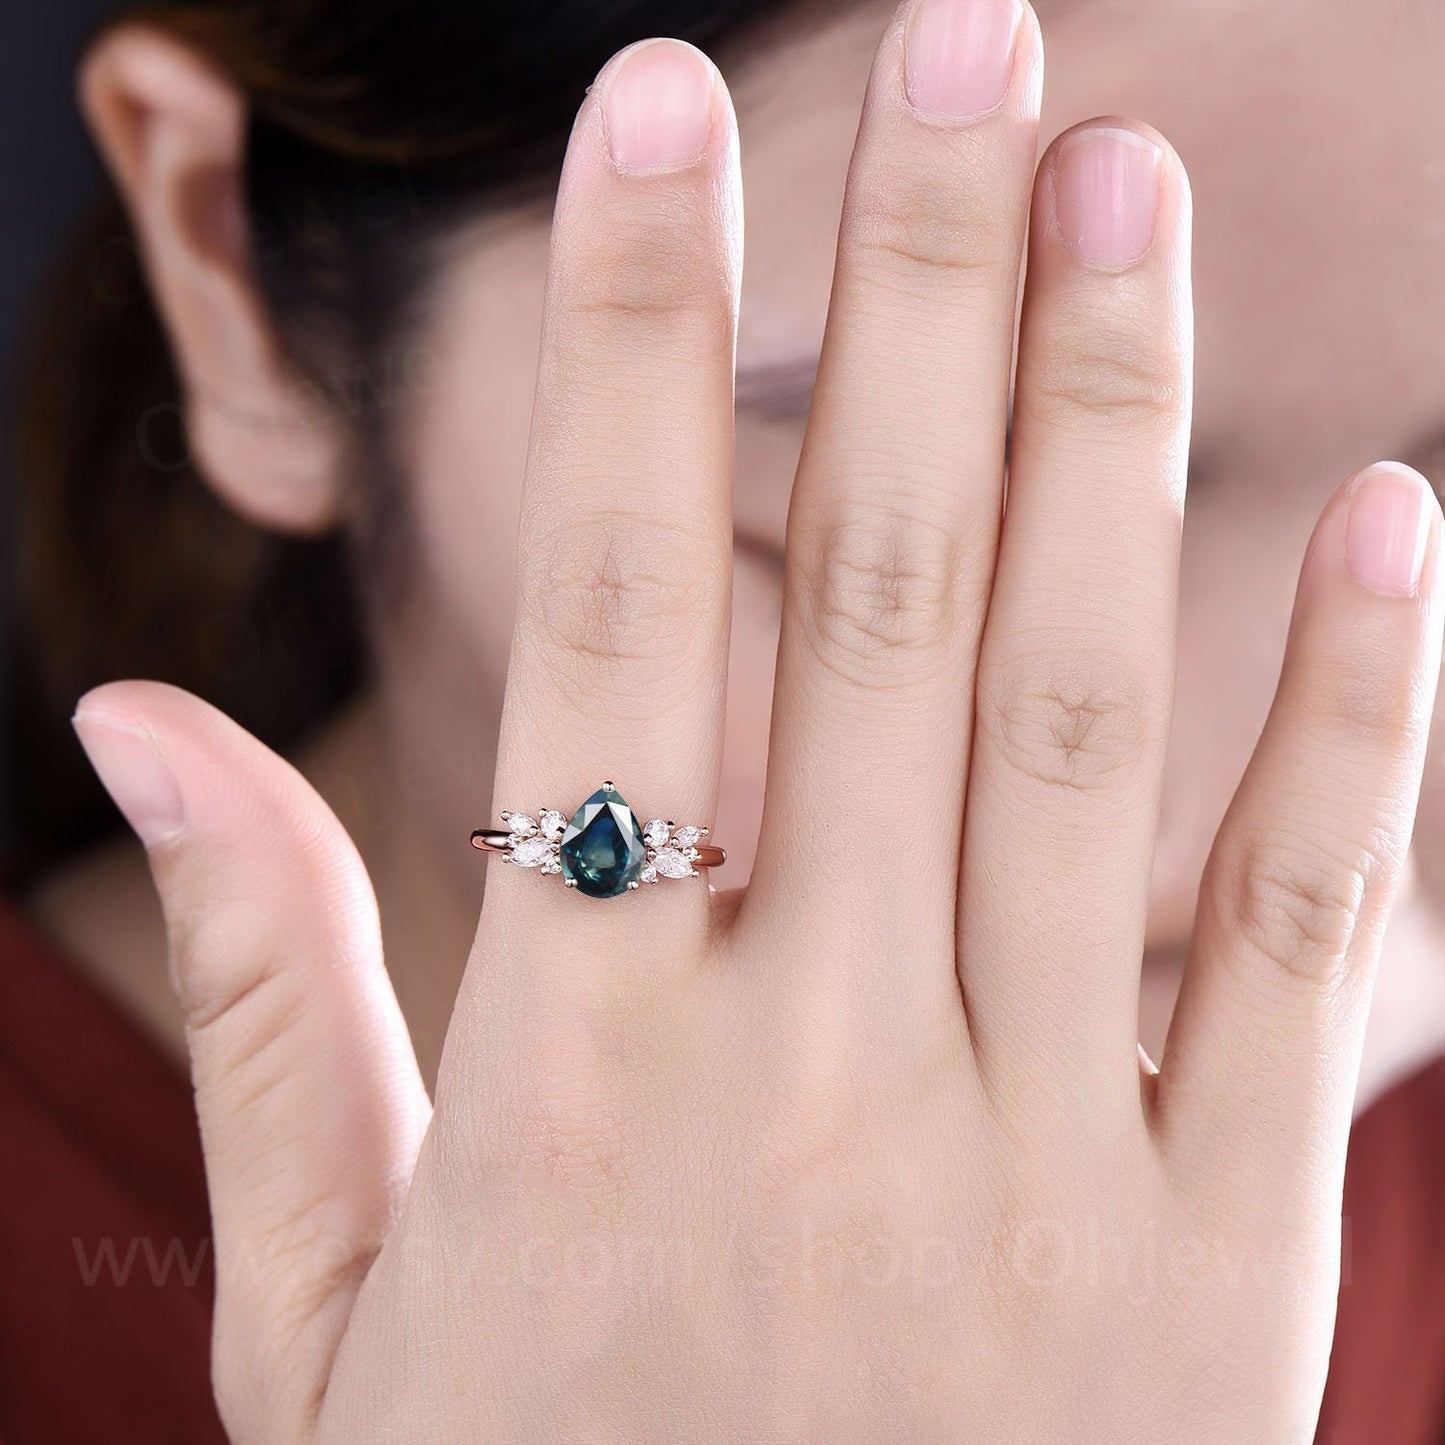 Pear shaped green teal sapphire ring gold vintage teal sapphire engagement ring unique cluster engagement ring marquise diamond ring women